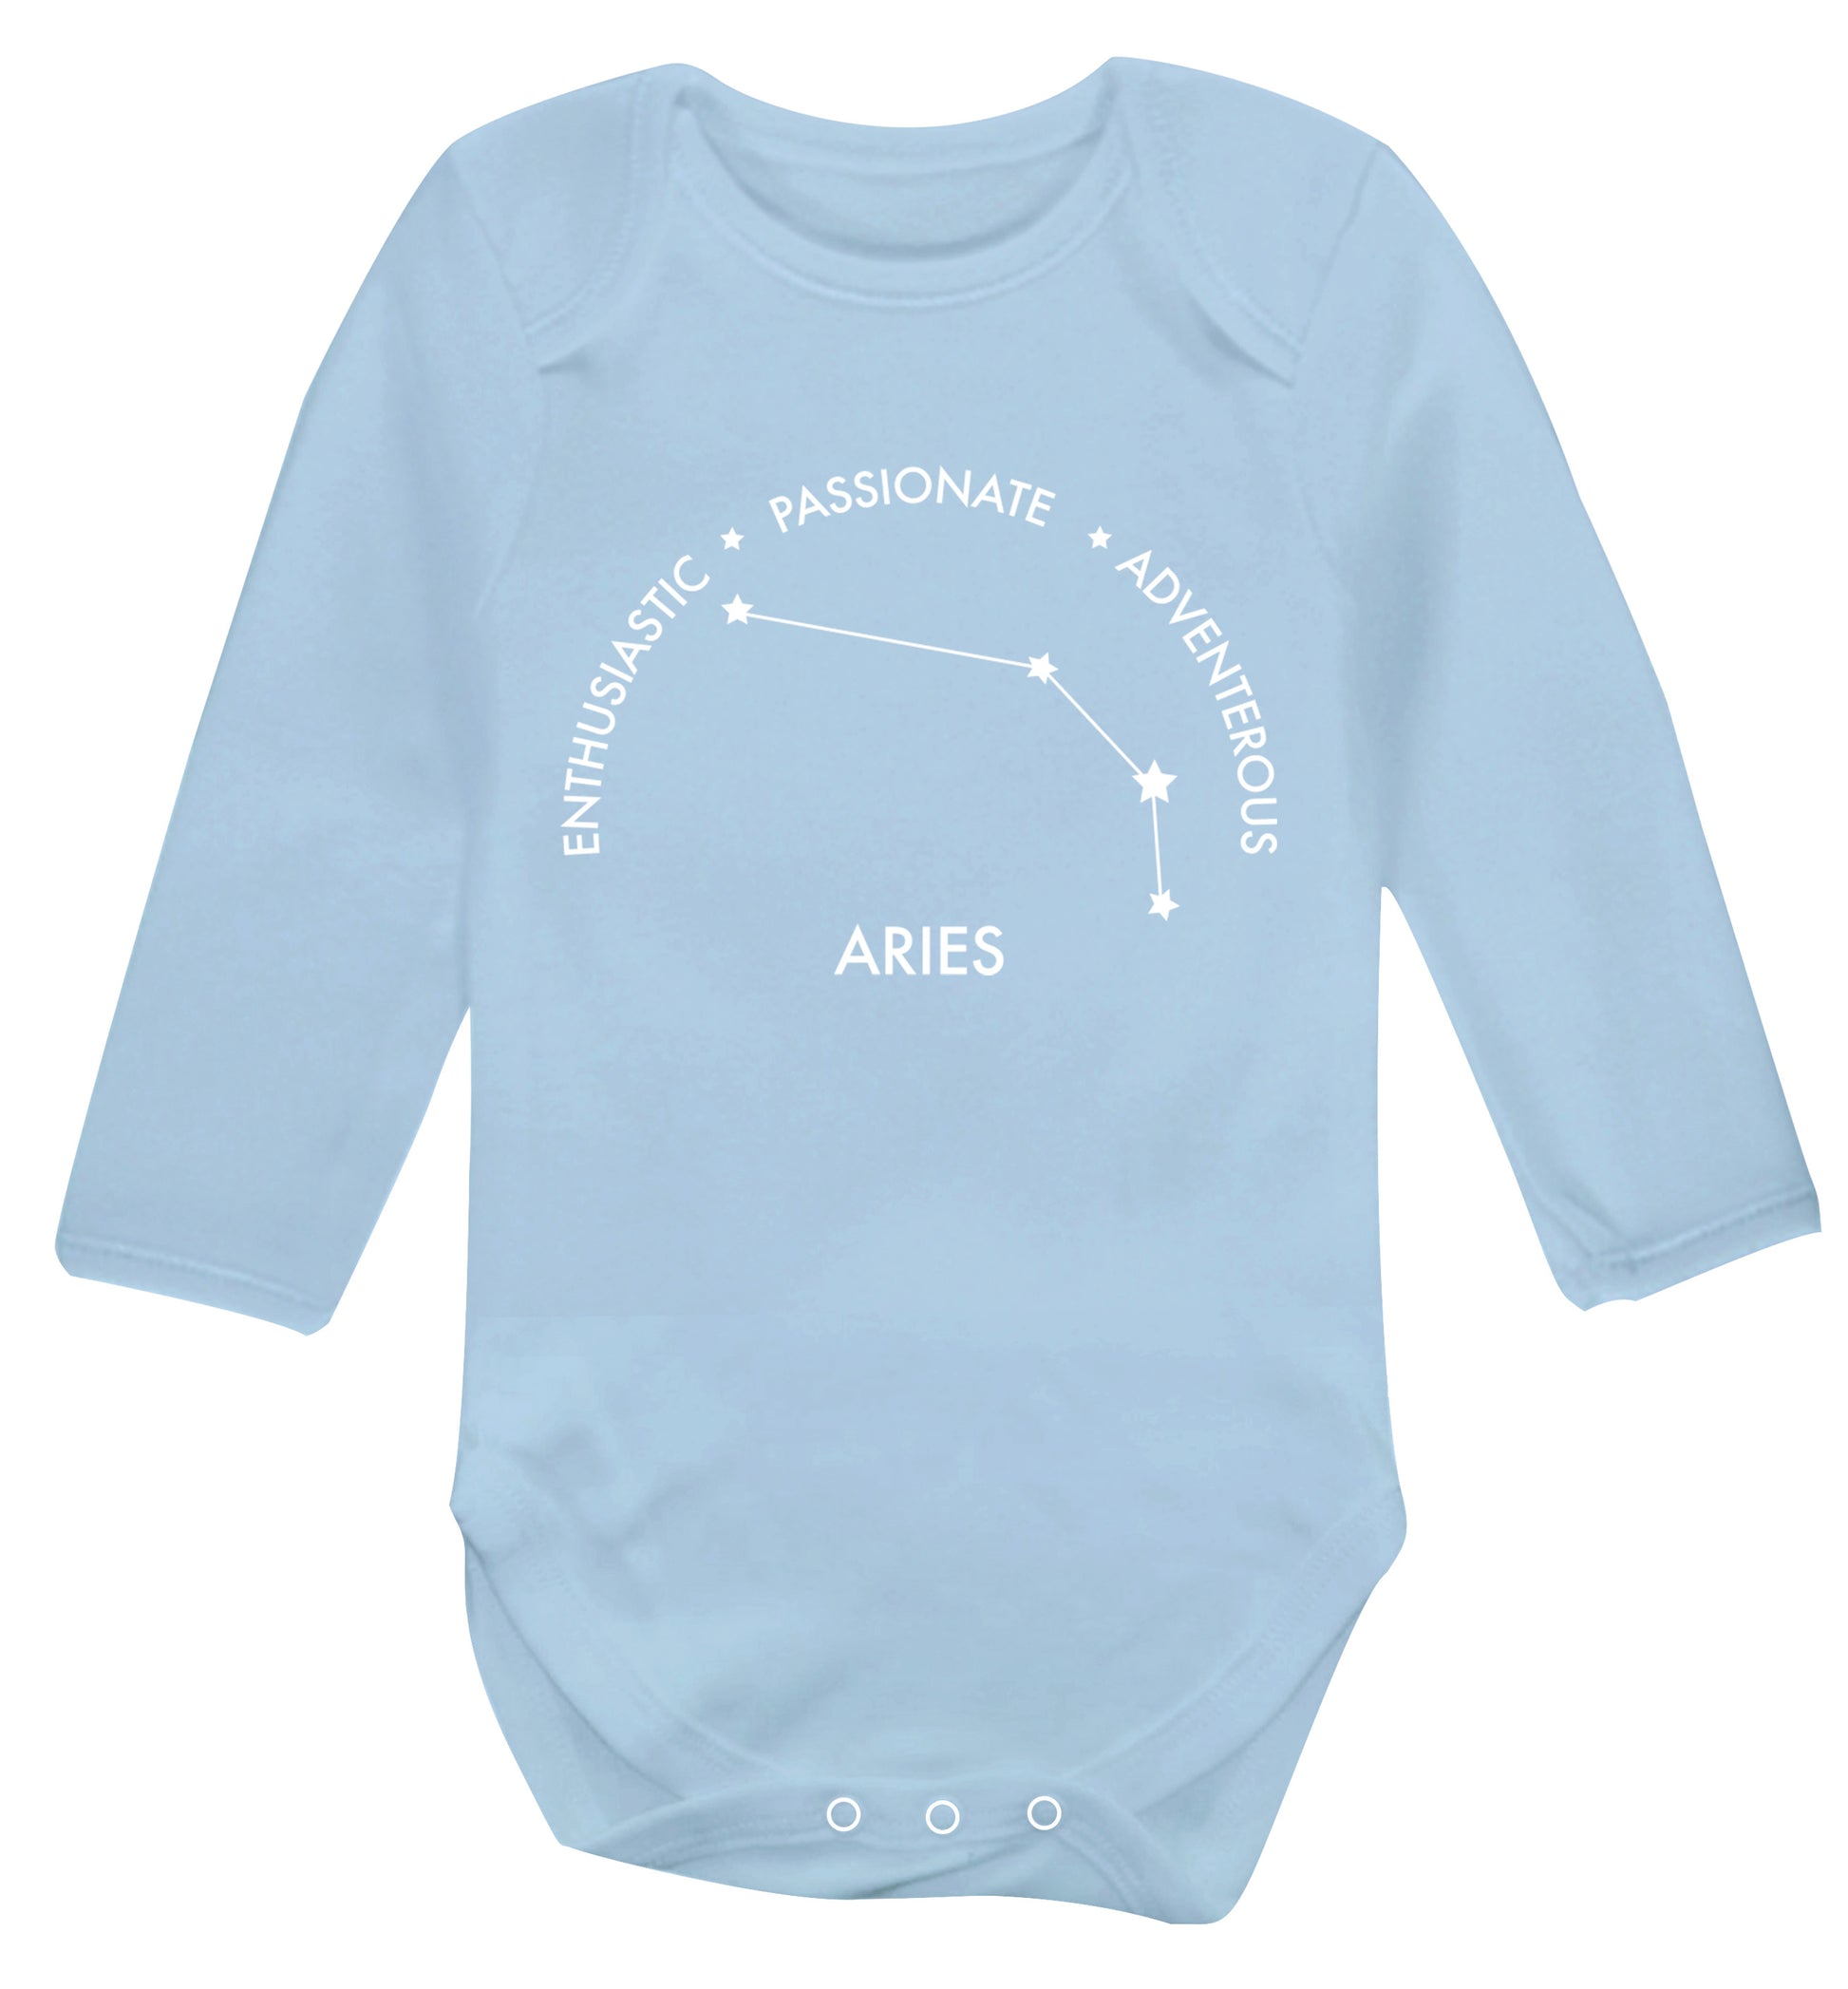 Aries enthusiastic | passionate | adventerous Baby Vest long sleeved pale blue 6-12 months